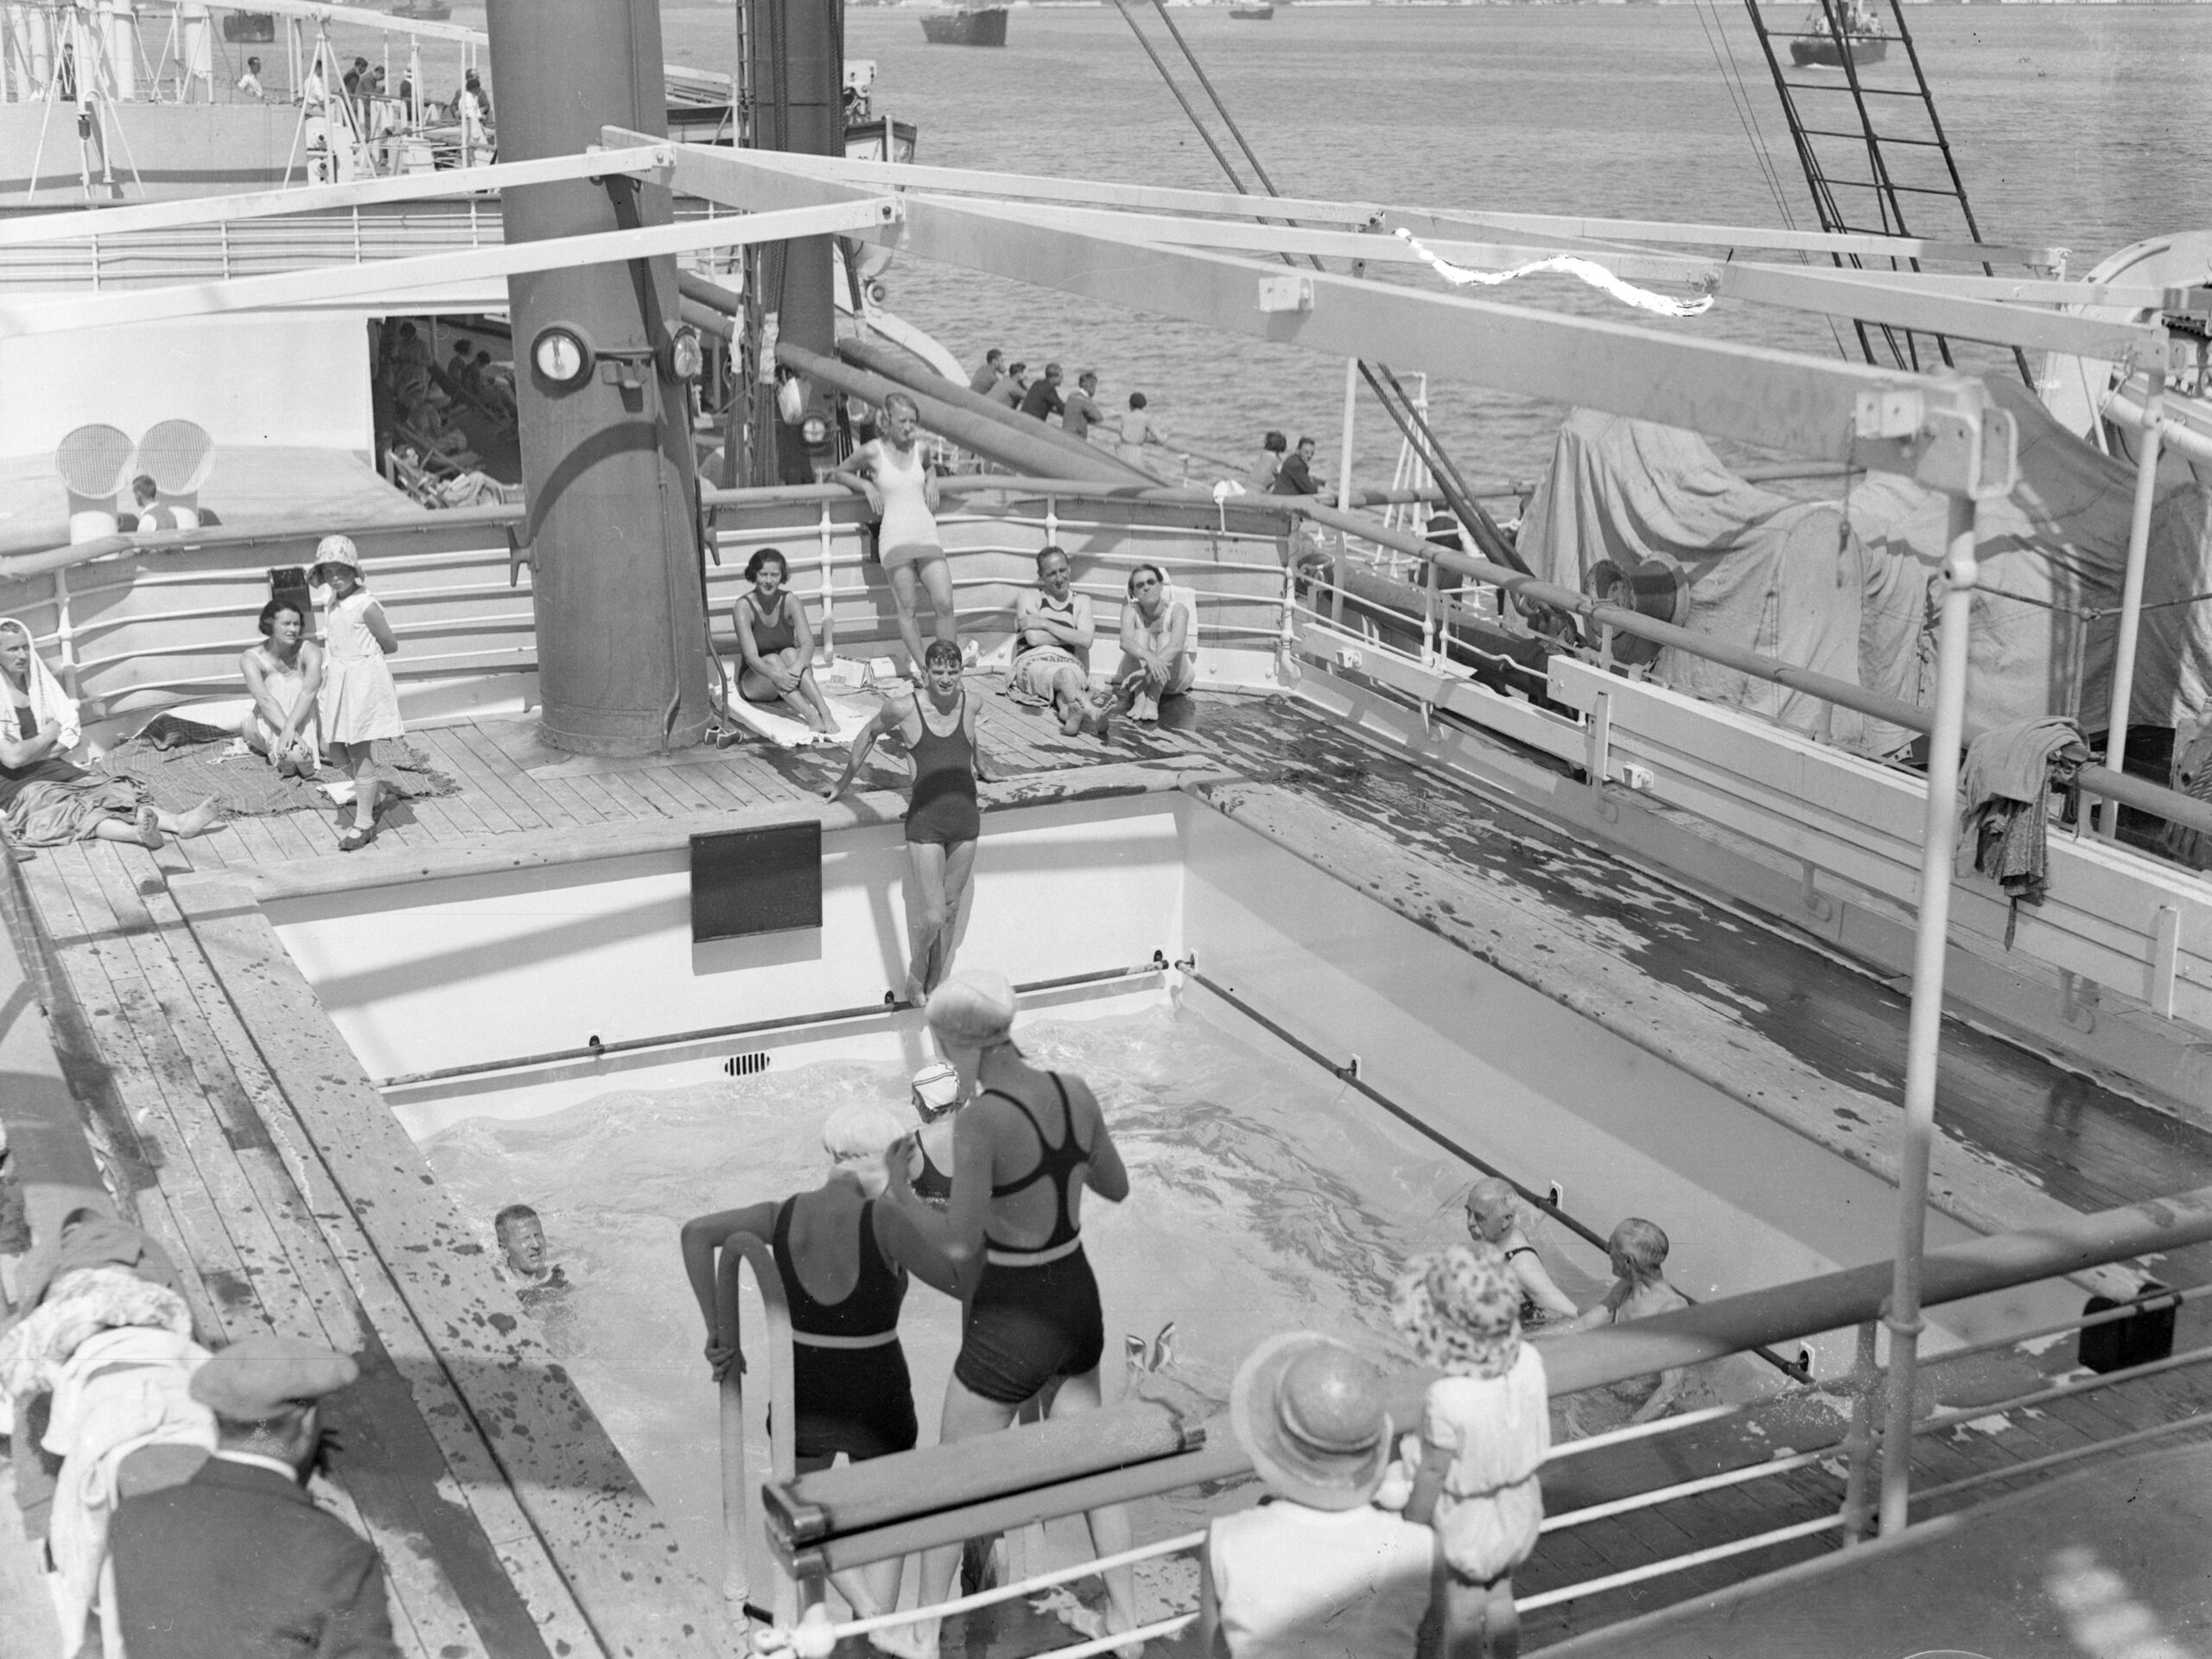 Passengers making use of the swimming pool on board the luxury Orient liner Orontes.